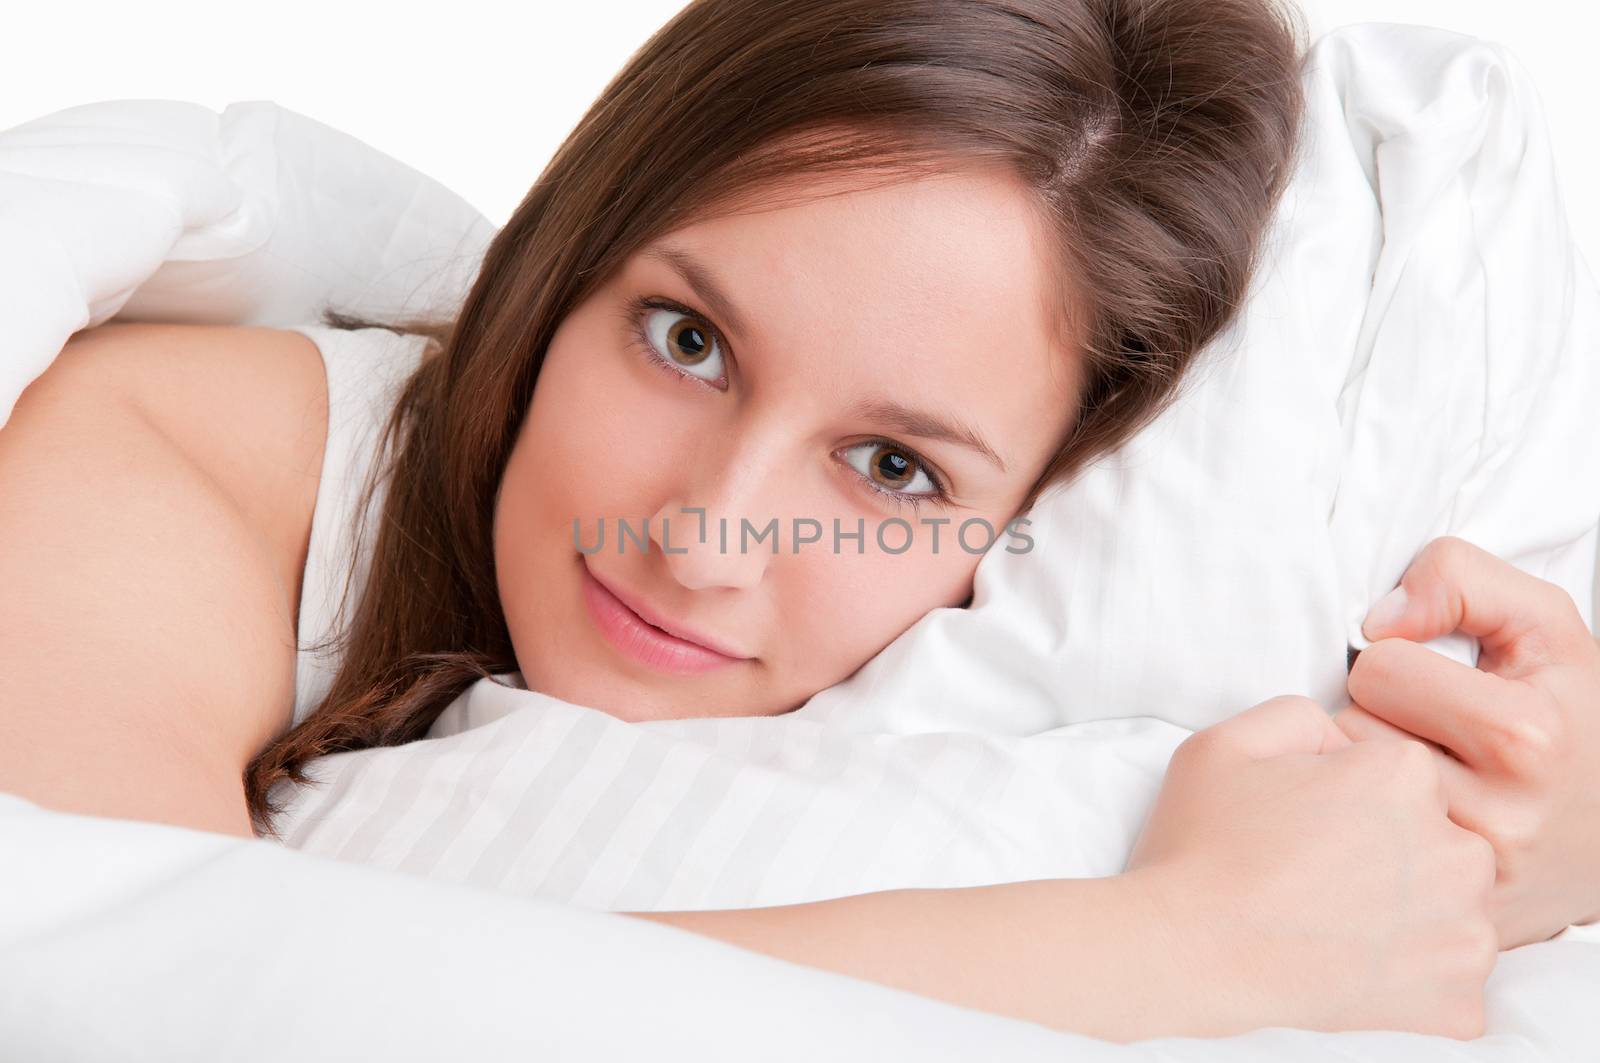 Woman in her bed, resting her head on a pillow